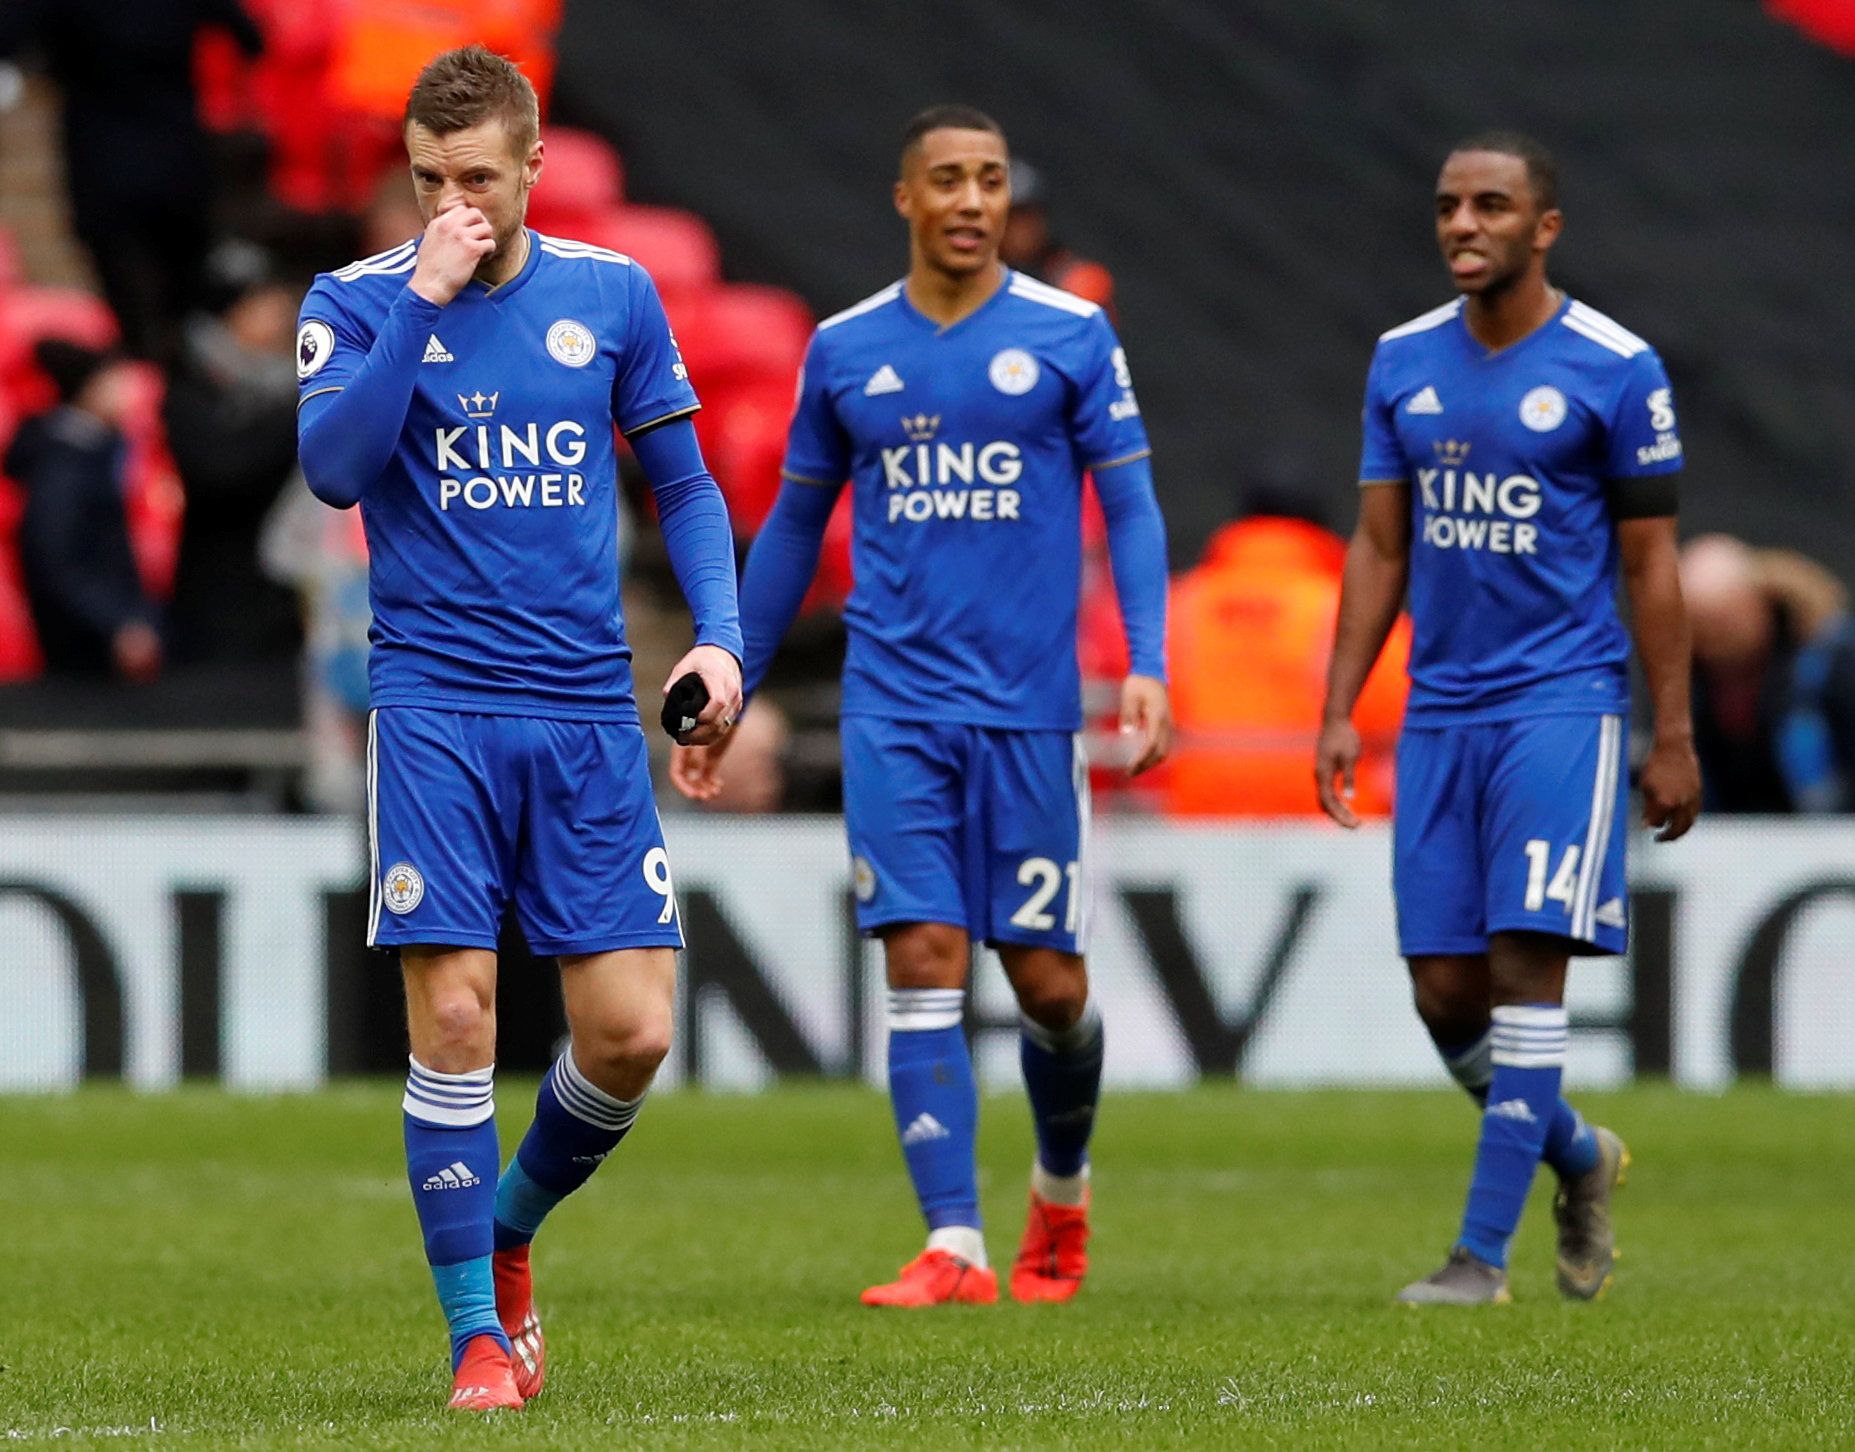 Soccer Football - Premier League - Tottenham Hotspur v Leicester City - Wembley Stadium, London, Britain - February 10, 2019  Leicester City's Jamie Vardy with Youri Tielemans and Ricardo Pereira after the match     REUTERS/David Klein  EDITORIAL USE ONLY. No use with unauthorized audio, video, data, fixture lists, club/league logos or 